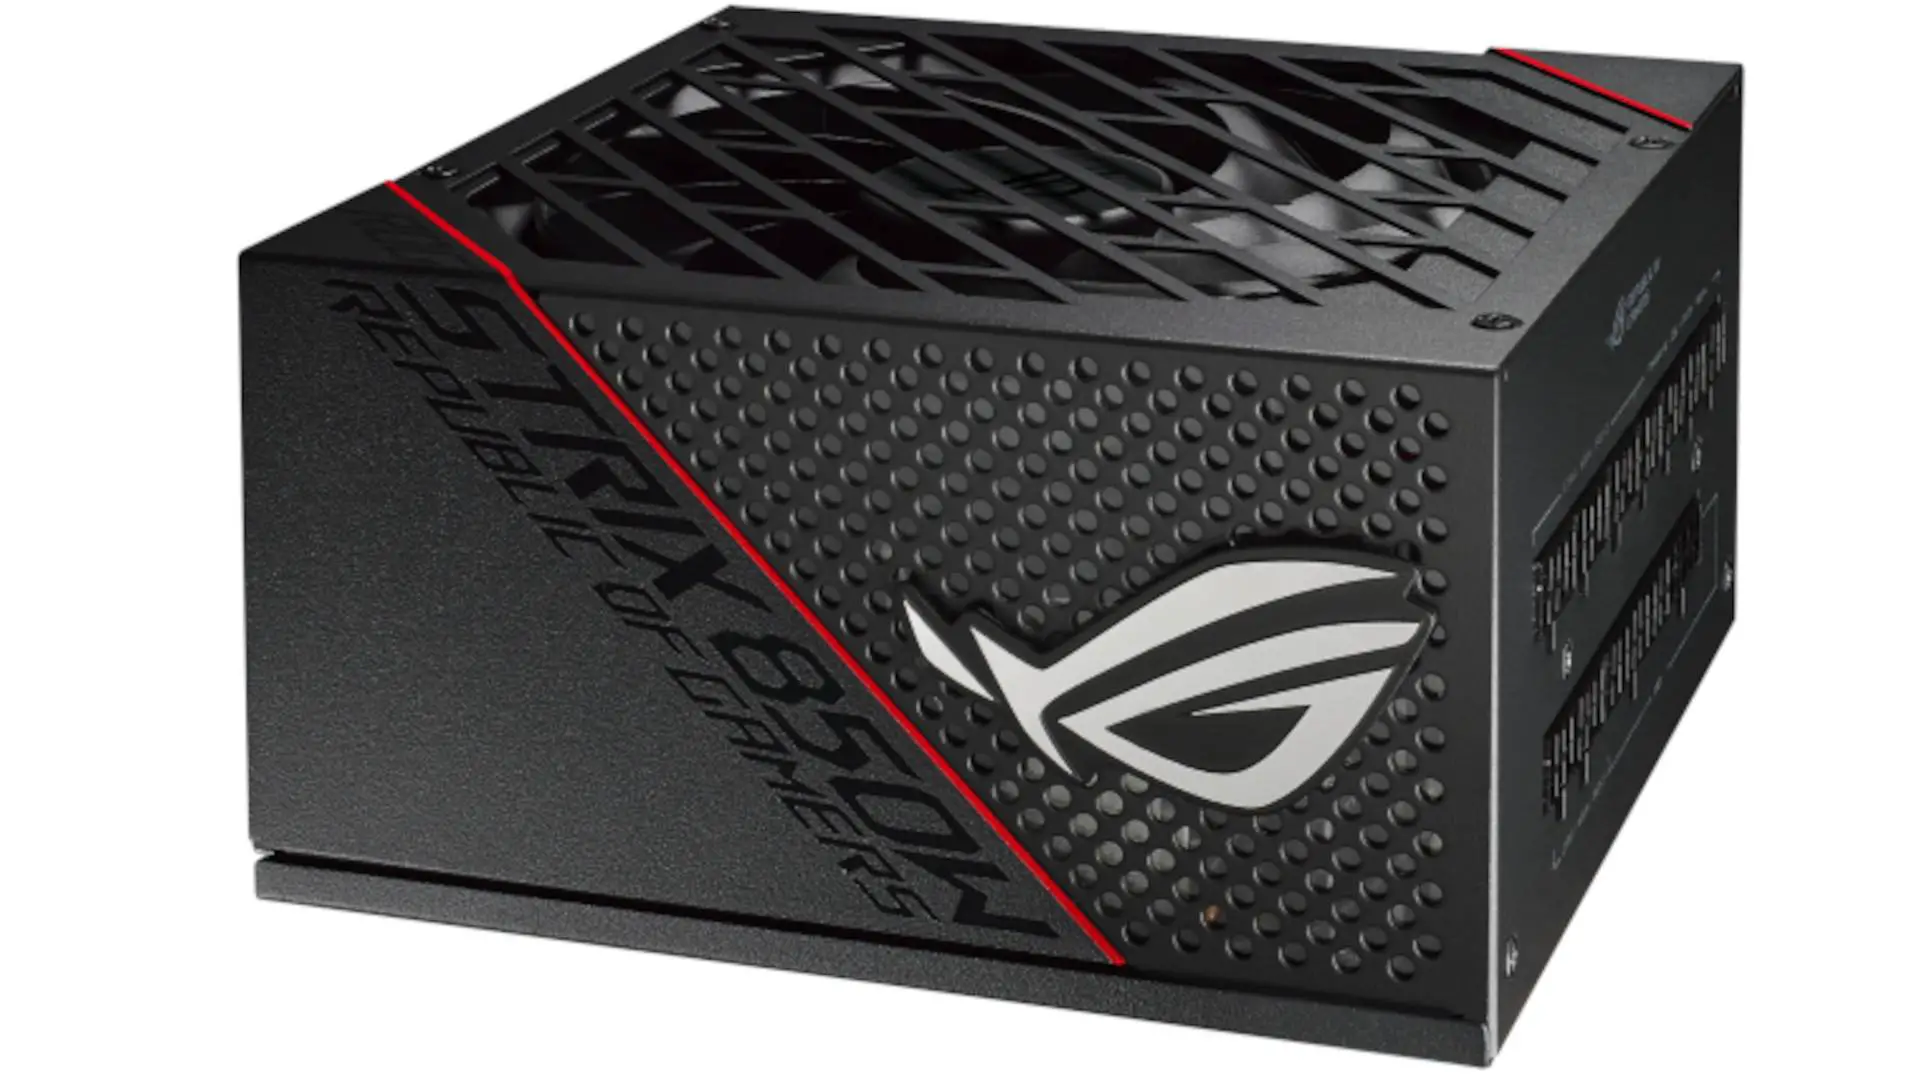 You are currently viewing ROG STRIX 850W Gold (16-pin cable) Power Supply Review